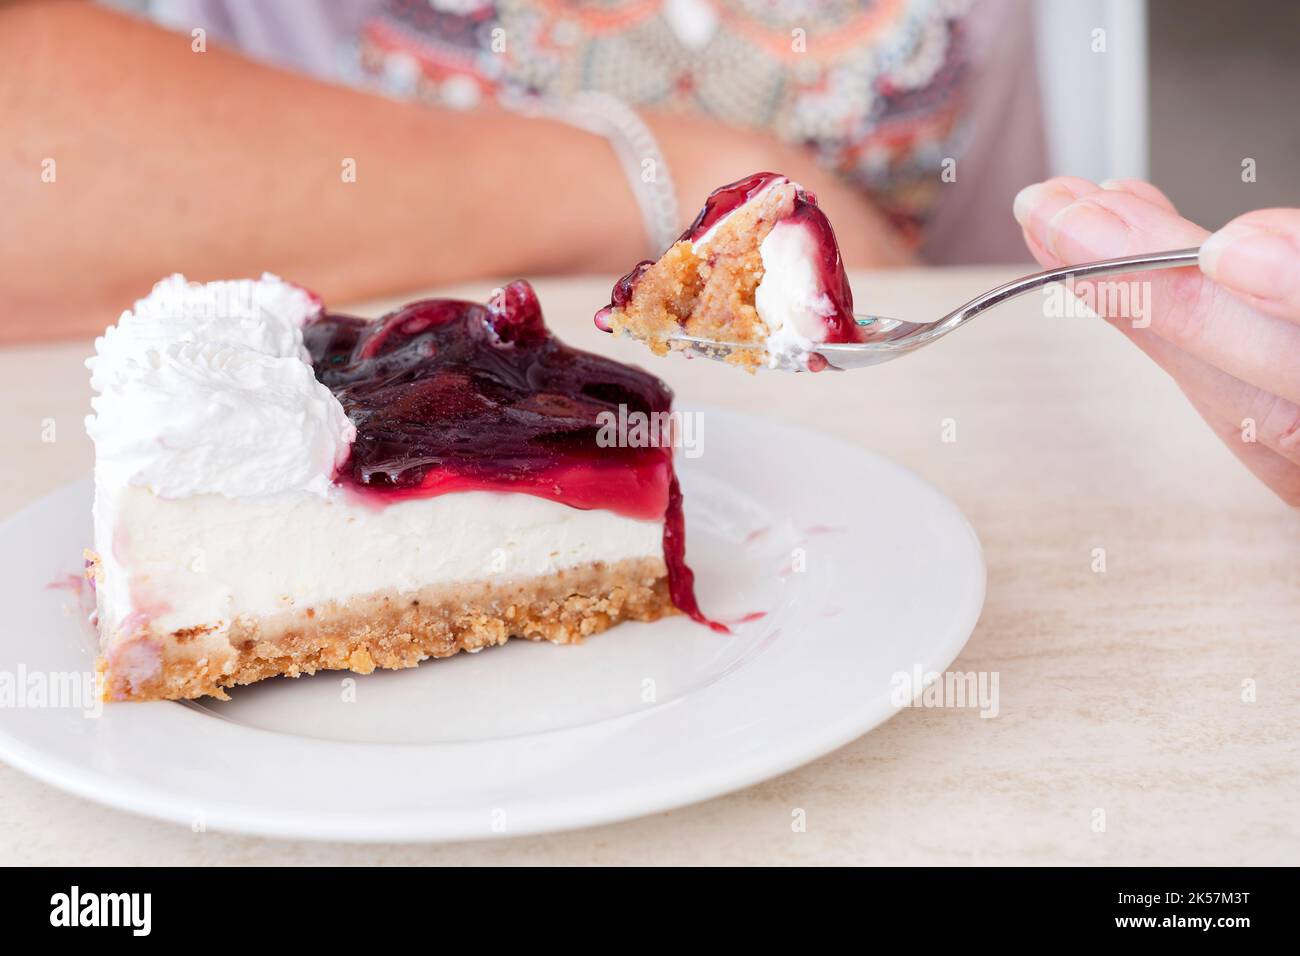 A woman eating a cherry cheesecake. She has a portion of the cheesecake on a fork in front of her Stock Photo